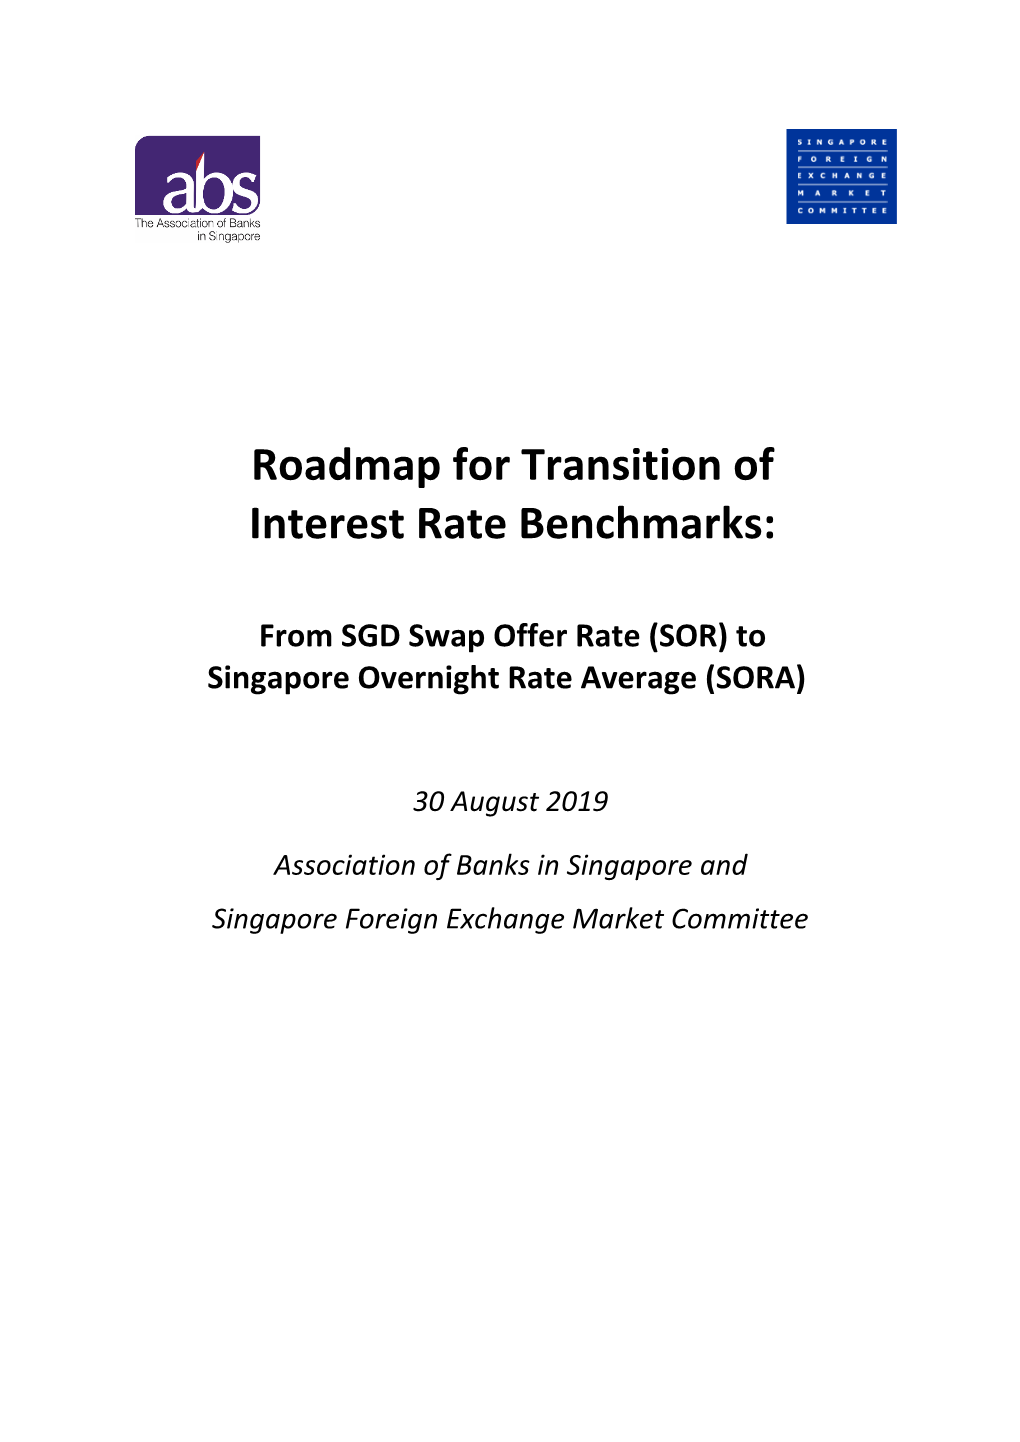 Roadmap for Transition of Interest Rate Benchmarks